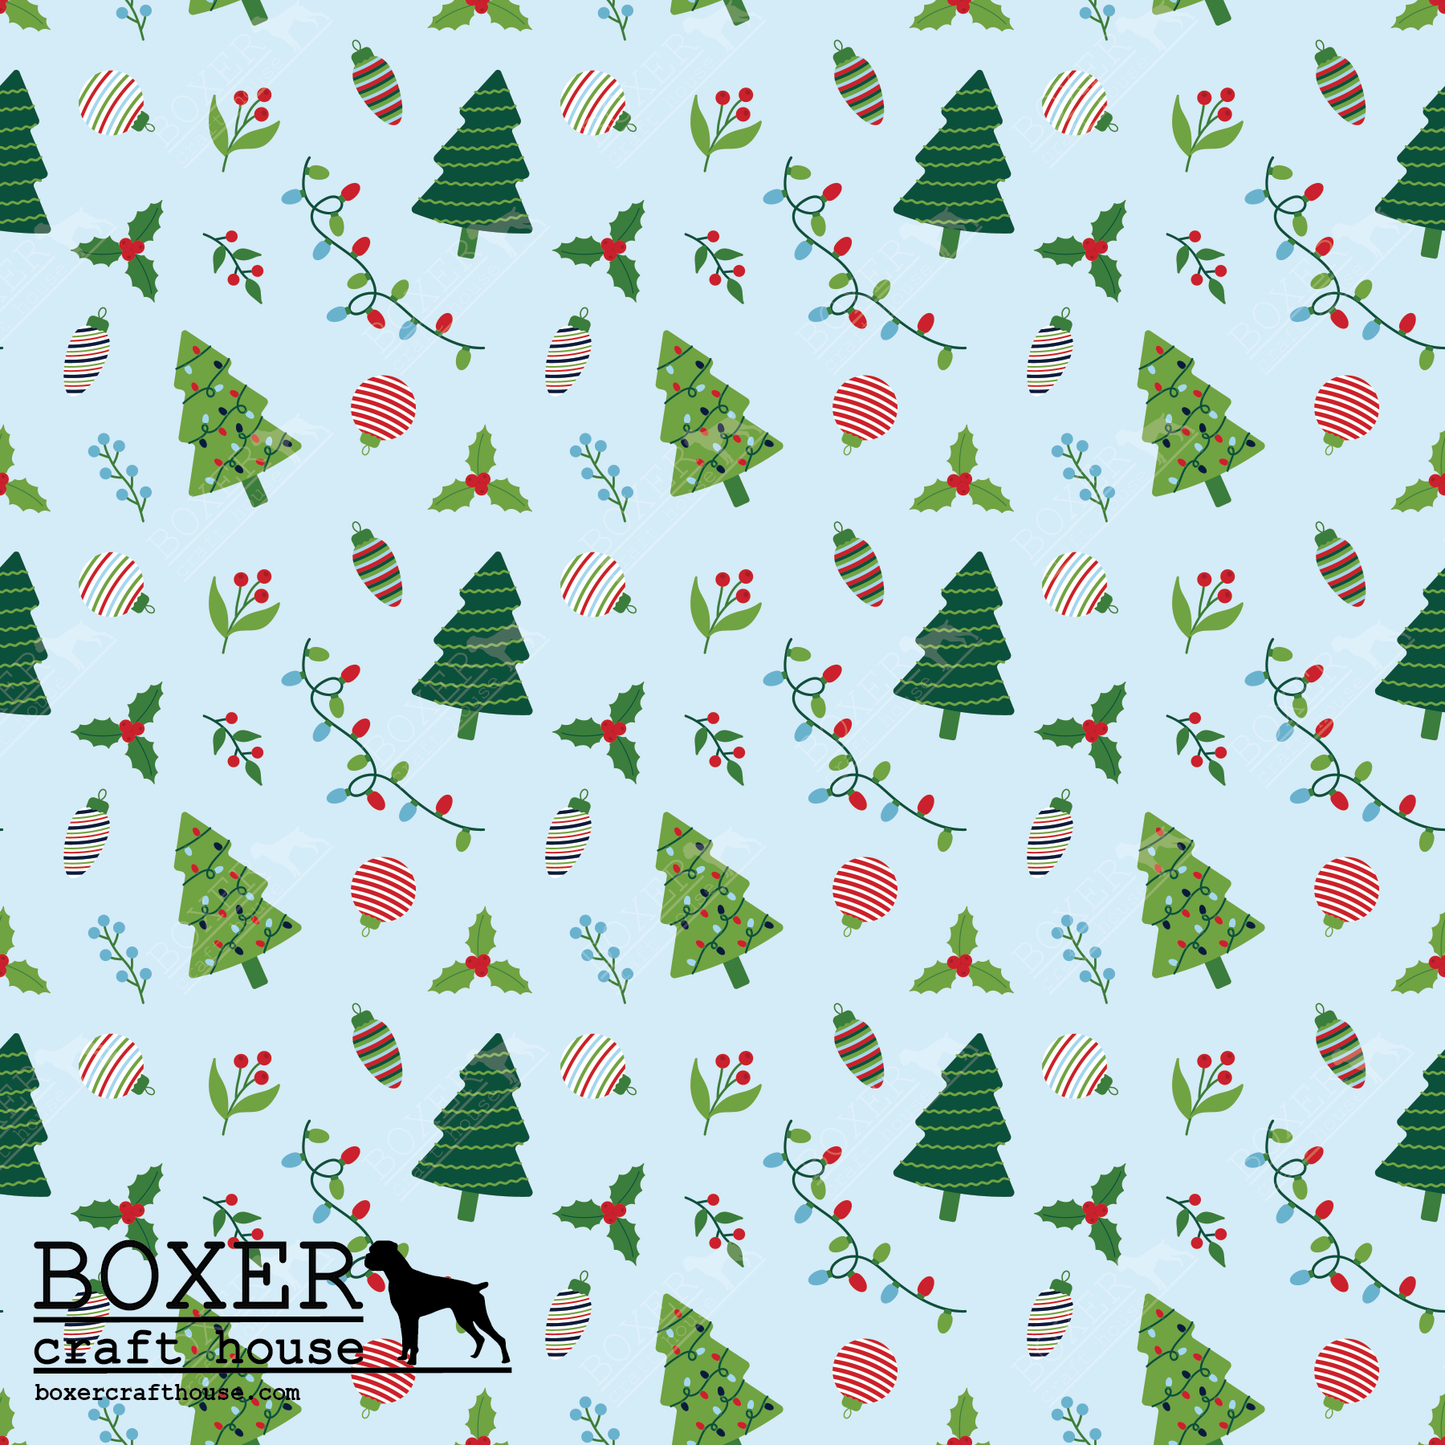 Christmas Lights Faux Leather, Holiday Cheer, Printed Faux Leather, Boxer Craft House, Embroidery Vinyl, Christmas Embroidery Vinyl, Applique Vinyl, Craft Vinyl, Christmas Time, Holiday, Bag making faux leather,